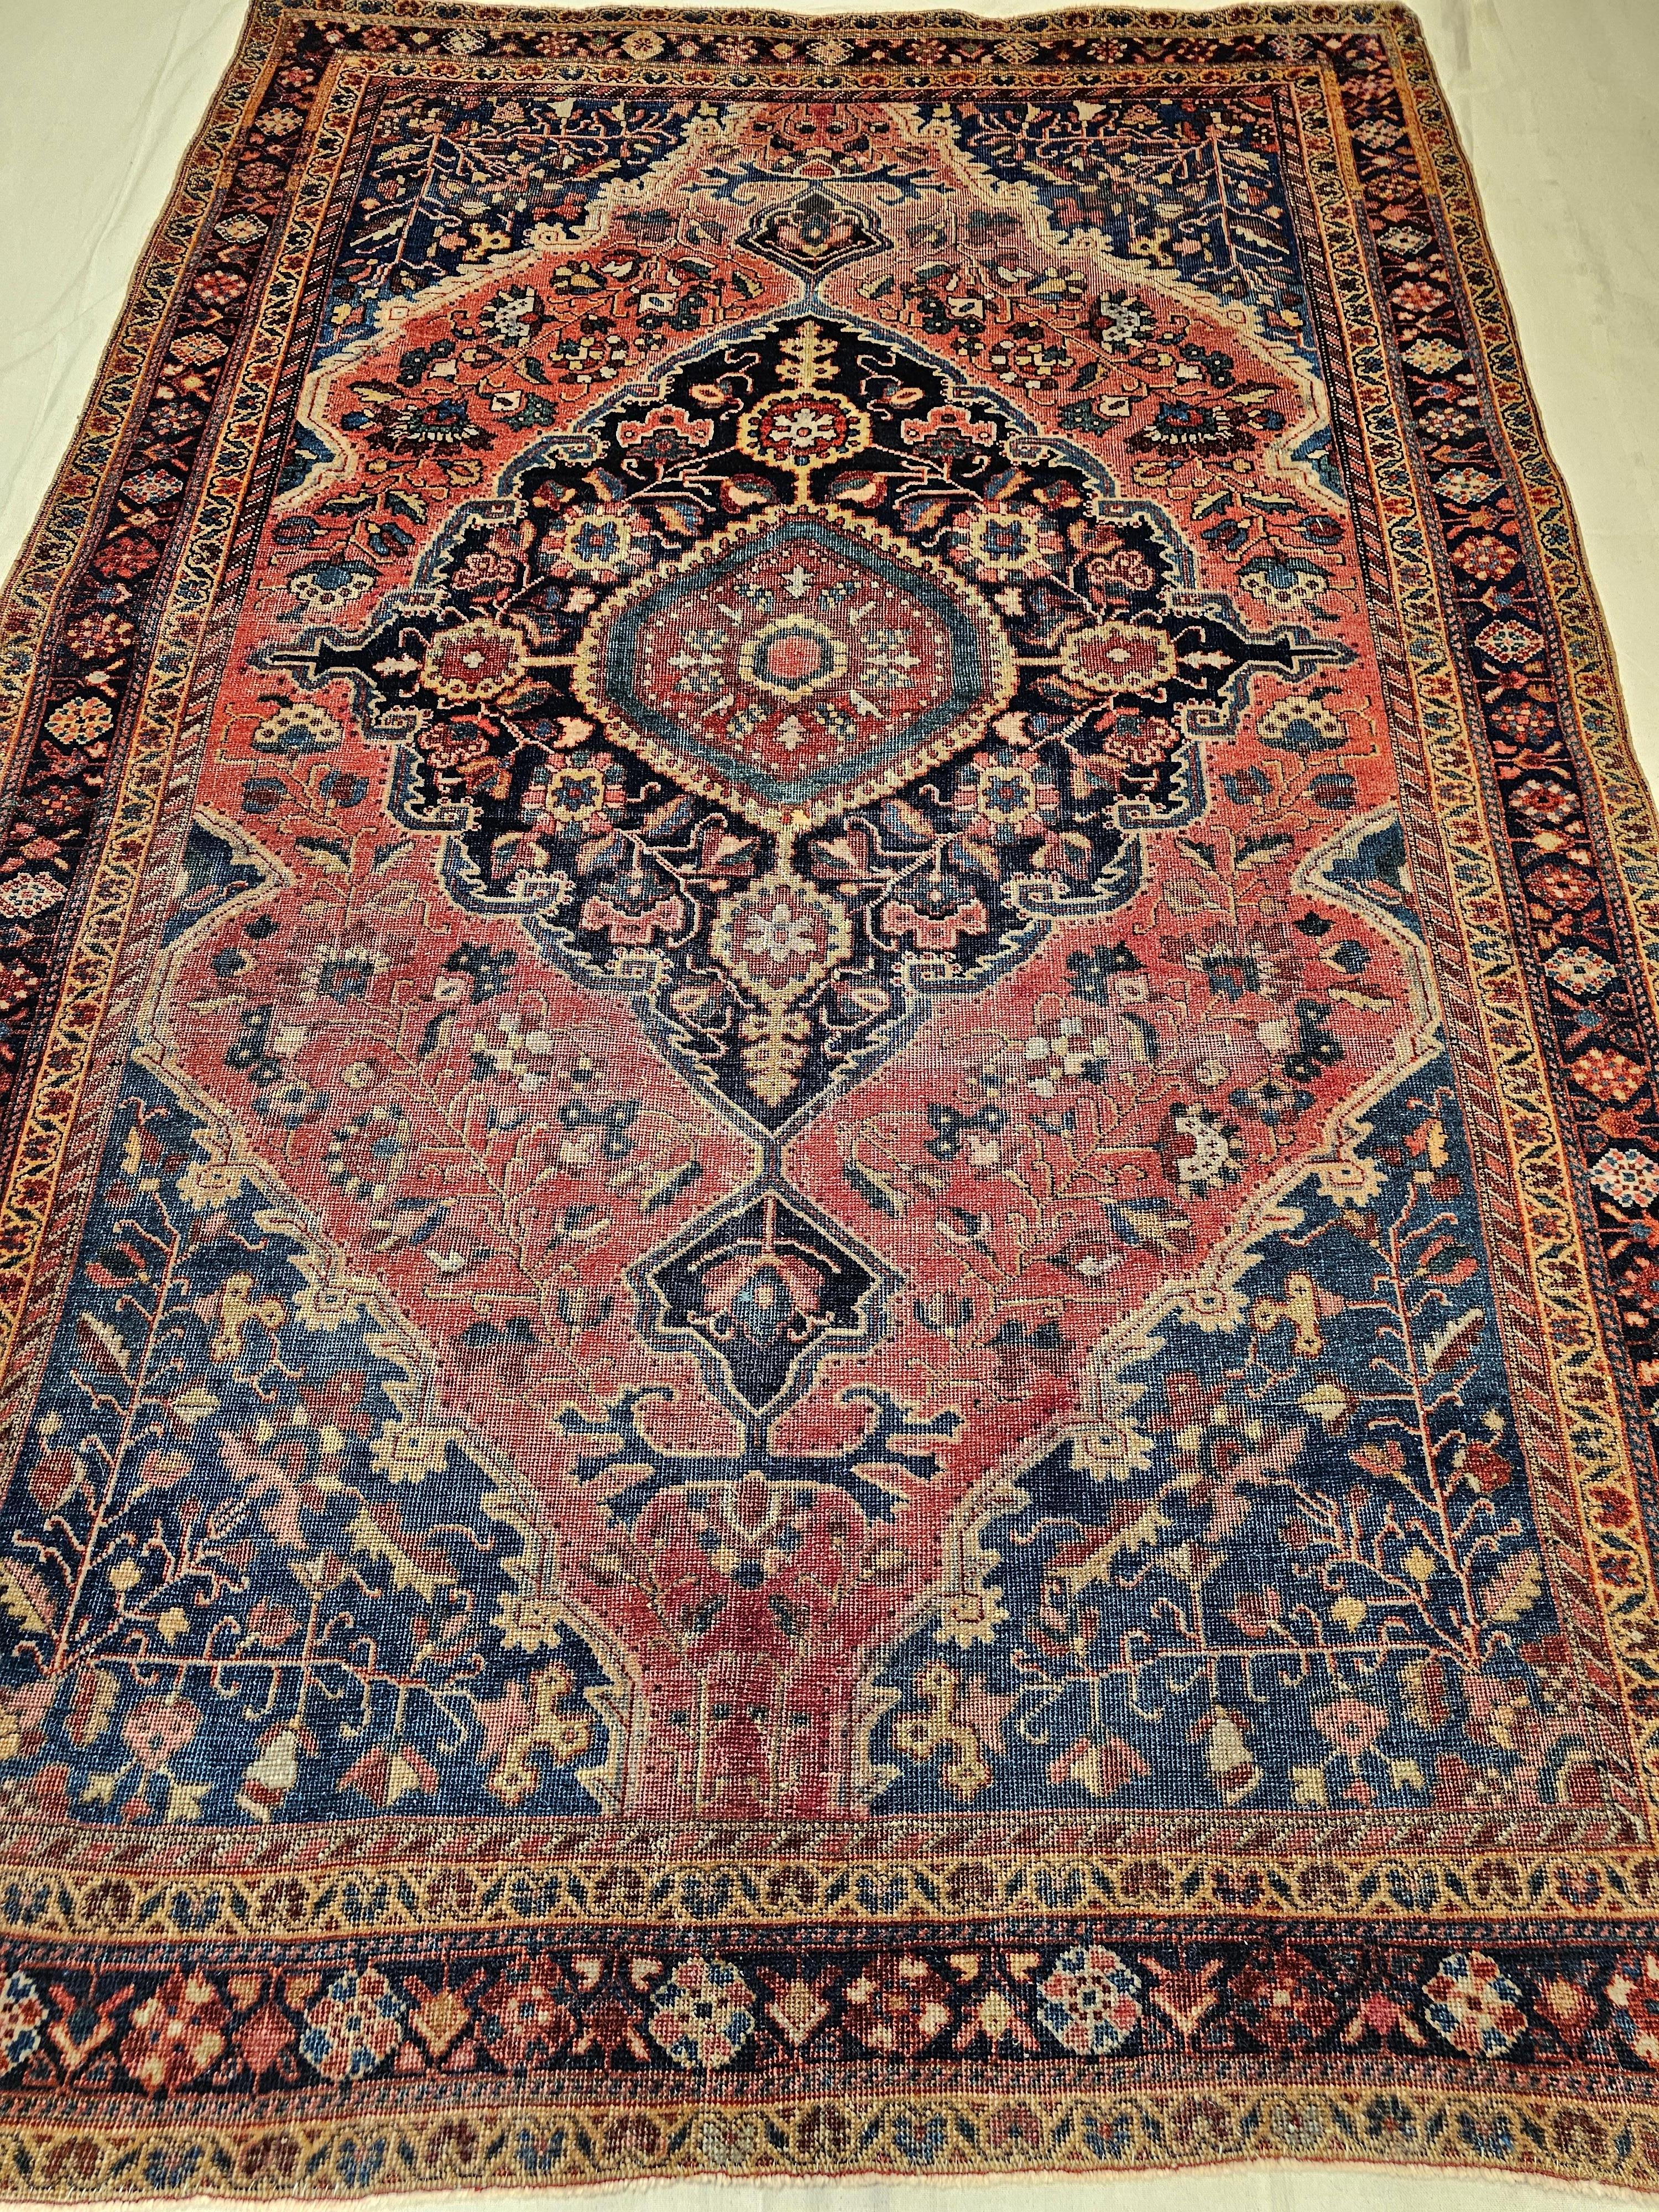 19th Century Persian Farahan Sarouk Area Rug in Rust Red, French Blue, Navy Blue For Sale 6